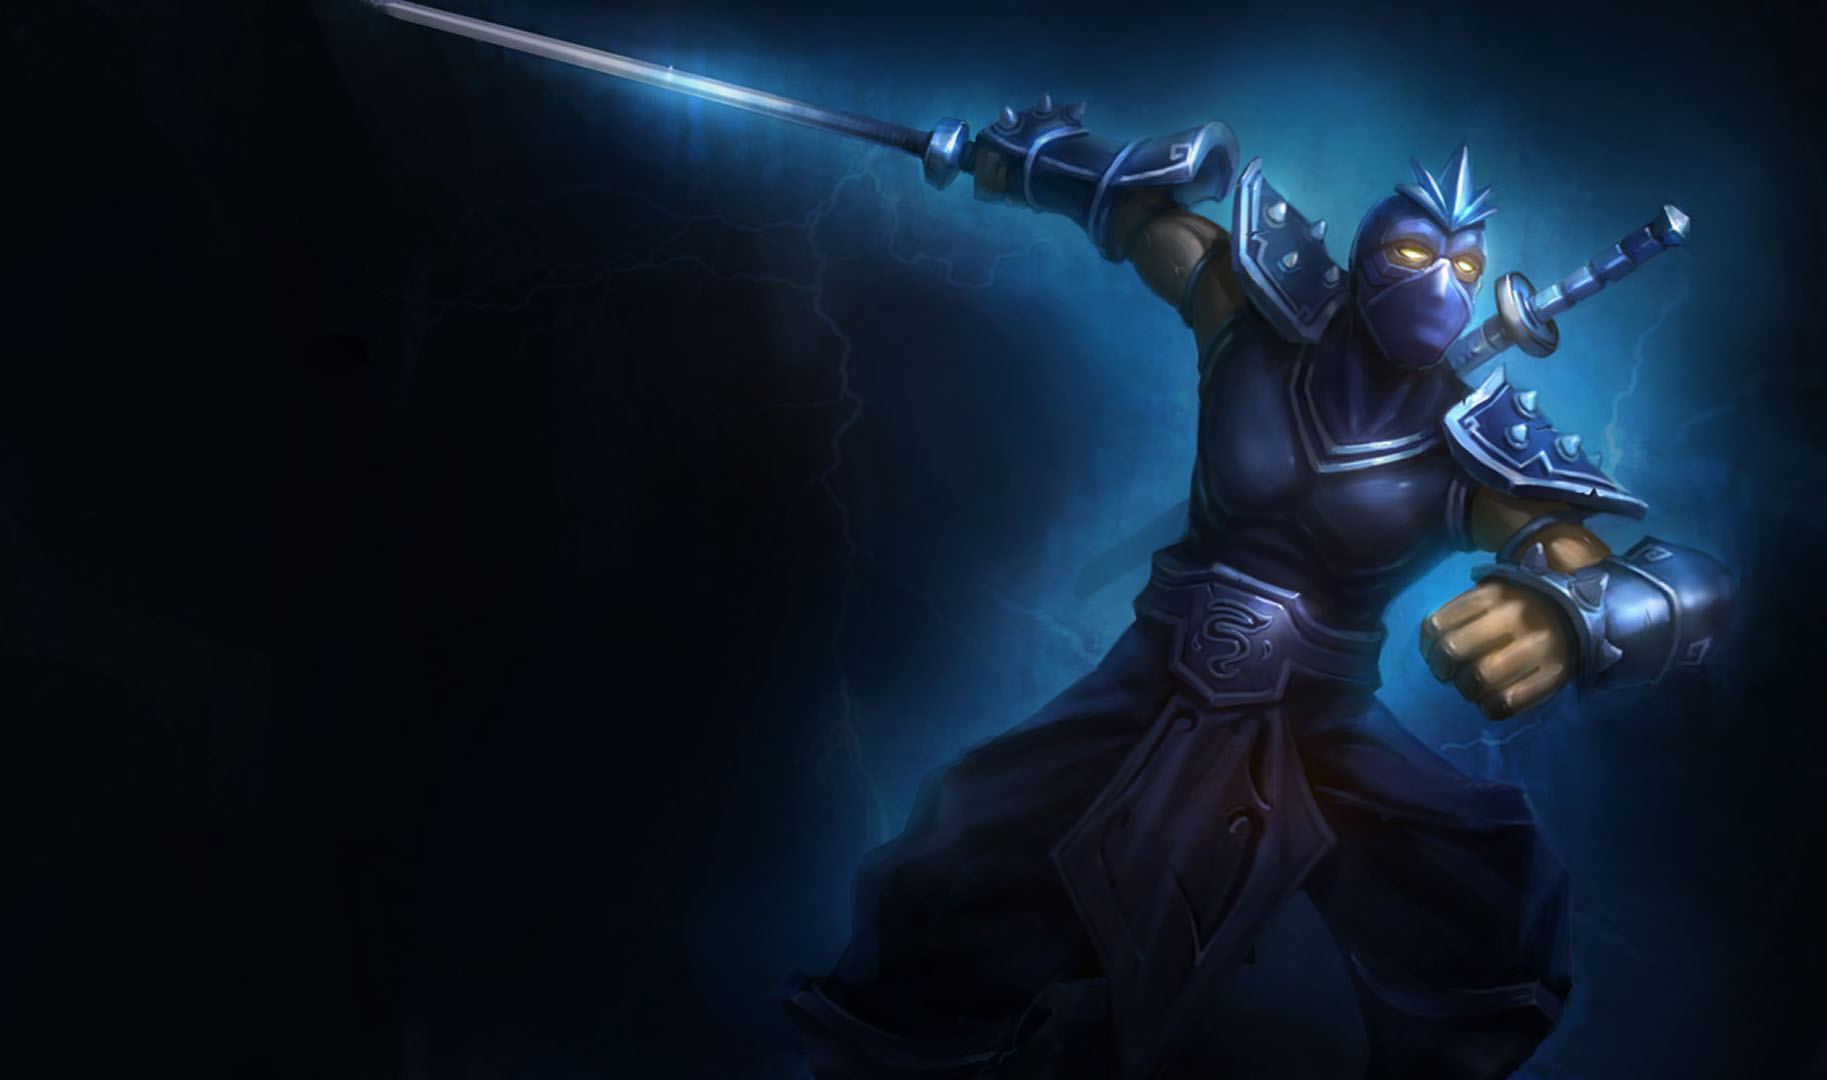 Shen, The Eye Twilight from of Legends